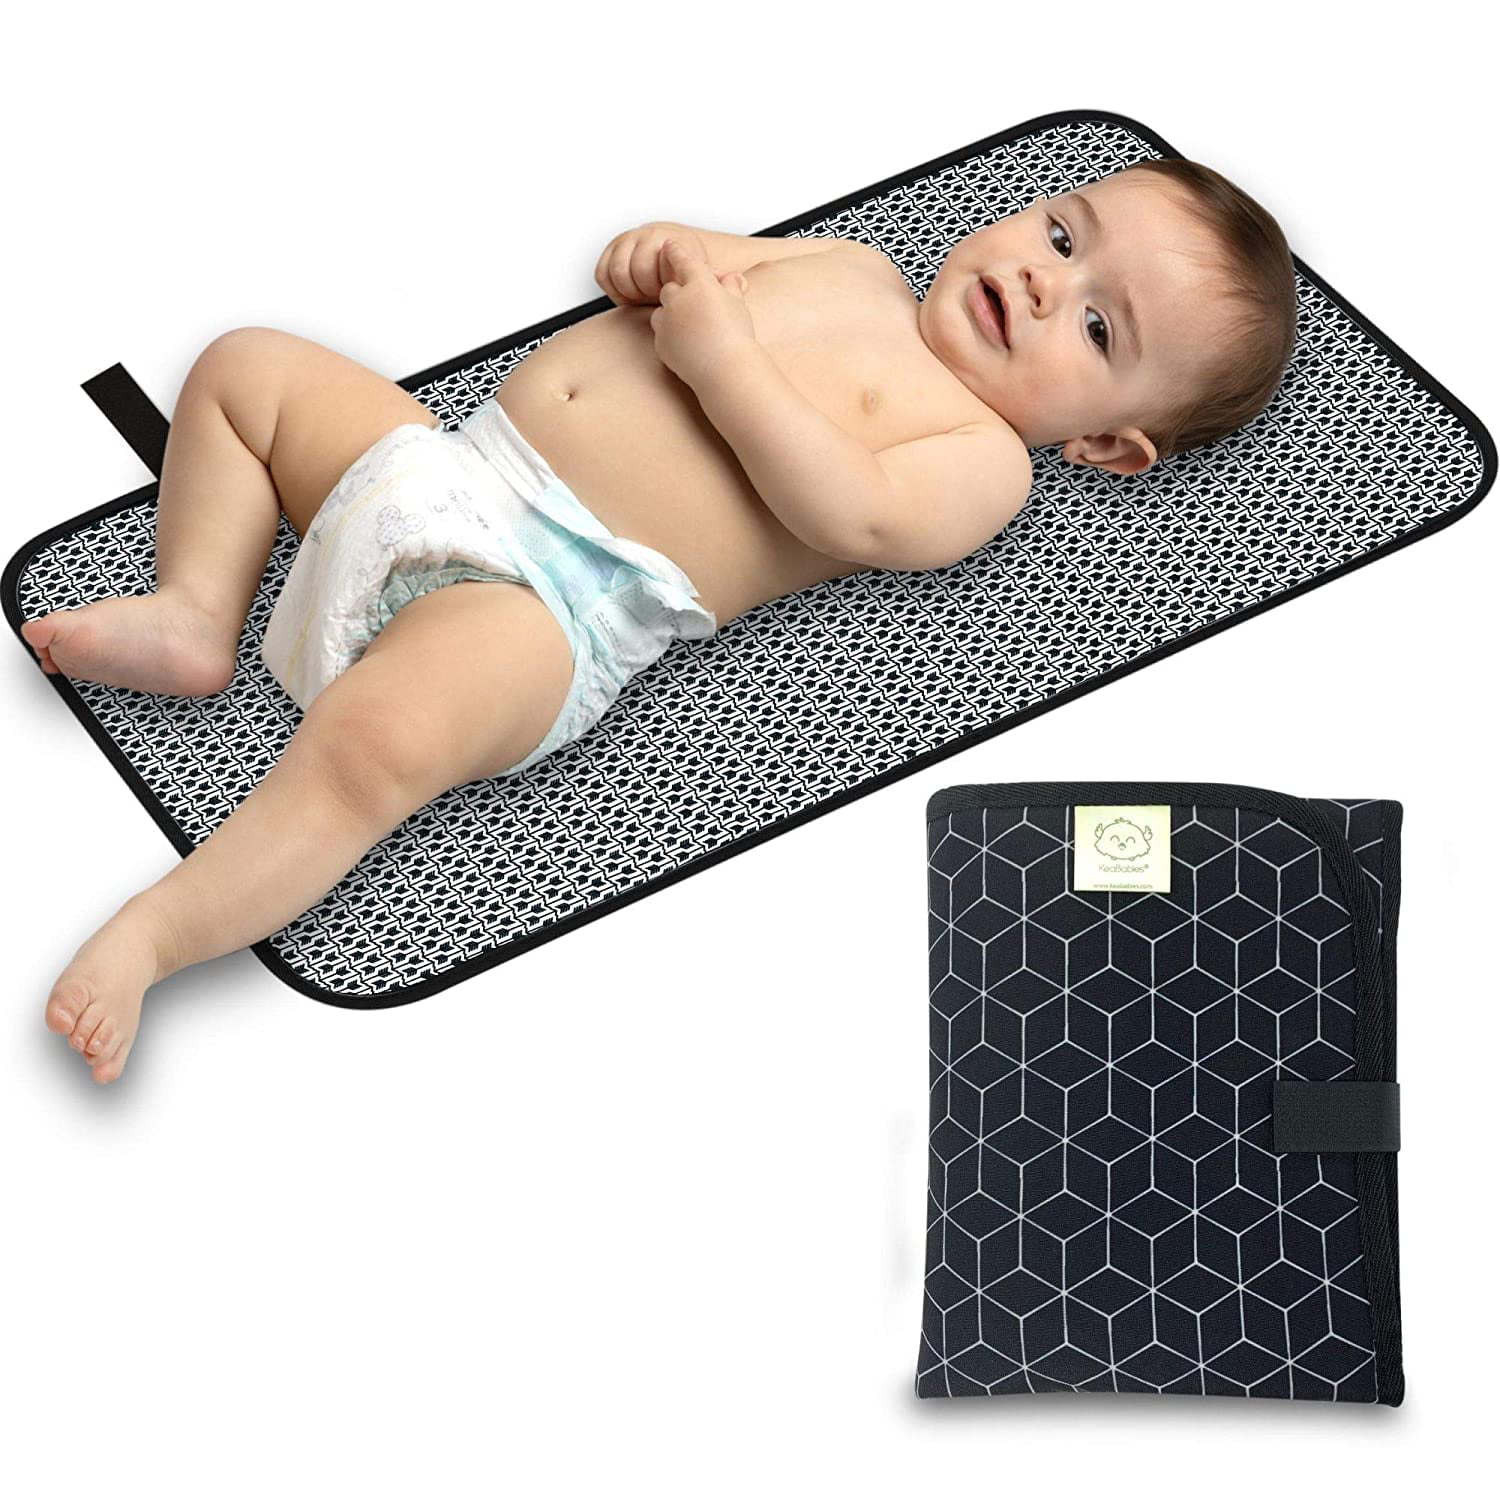 SDERY79 Forest Animal Green Portable Changing Pad Waterproof Diaper Change Mat Large Size Multi-Function Home & Travel Mat Any Places Bed Play Stroller Crib Car Mattress Pad Cover